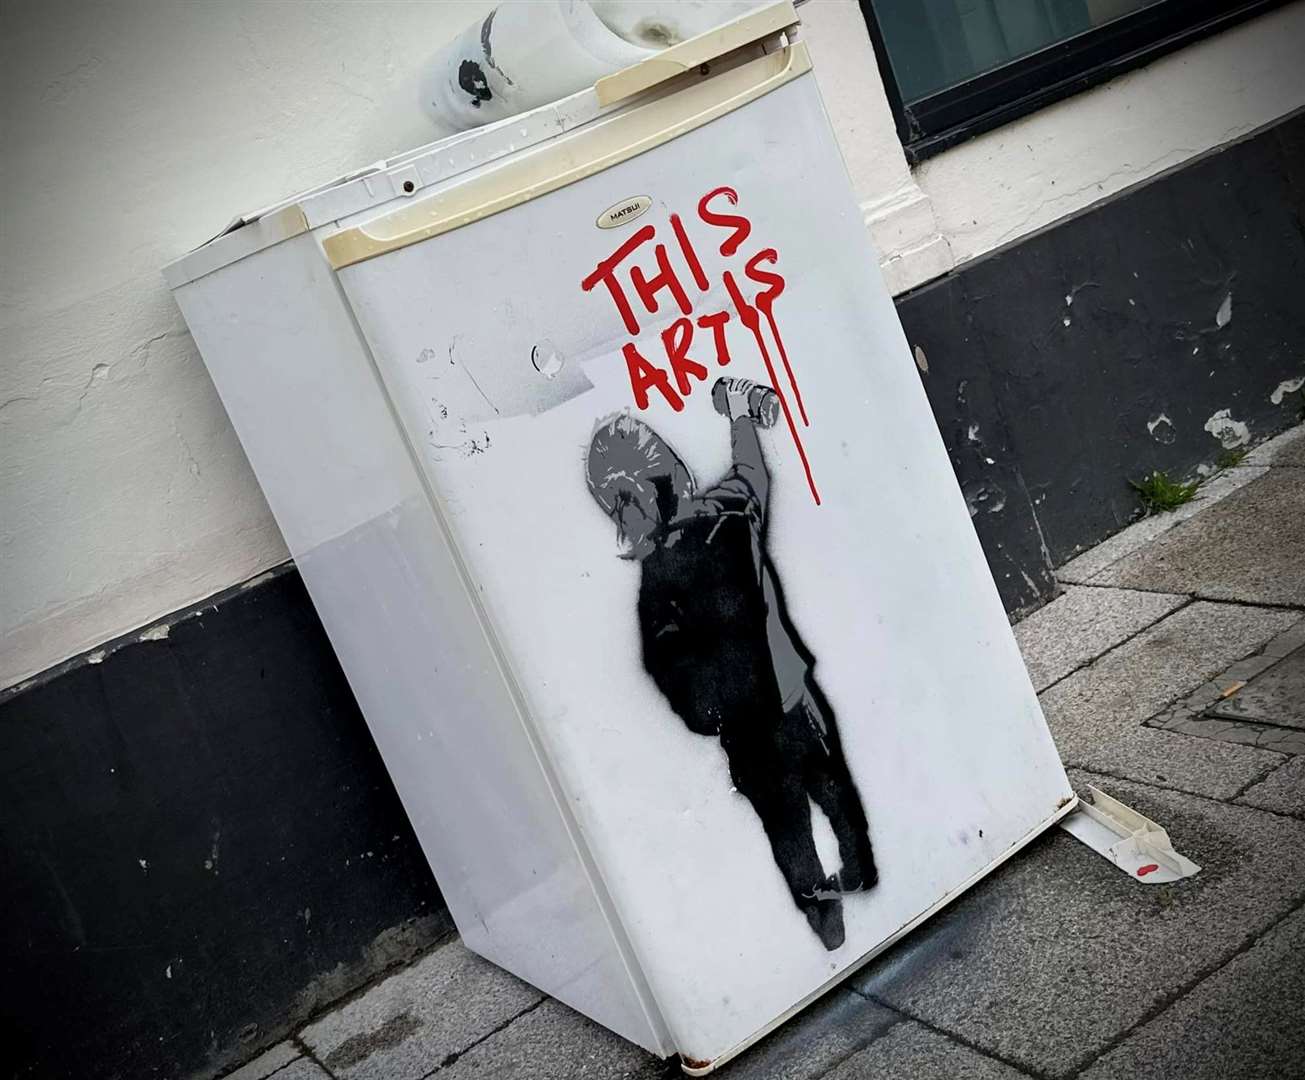 The fridge on Bank Street, Herne Bay, was removed within 12 hours from when he painted it. Picture: Nick Shaker